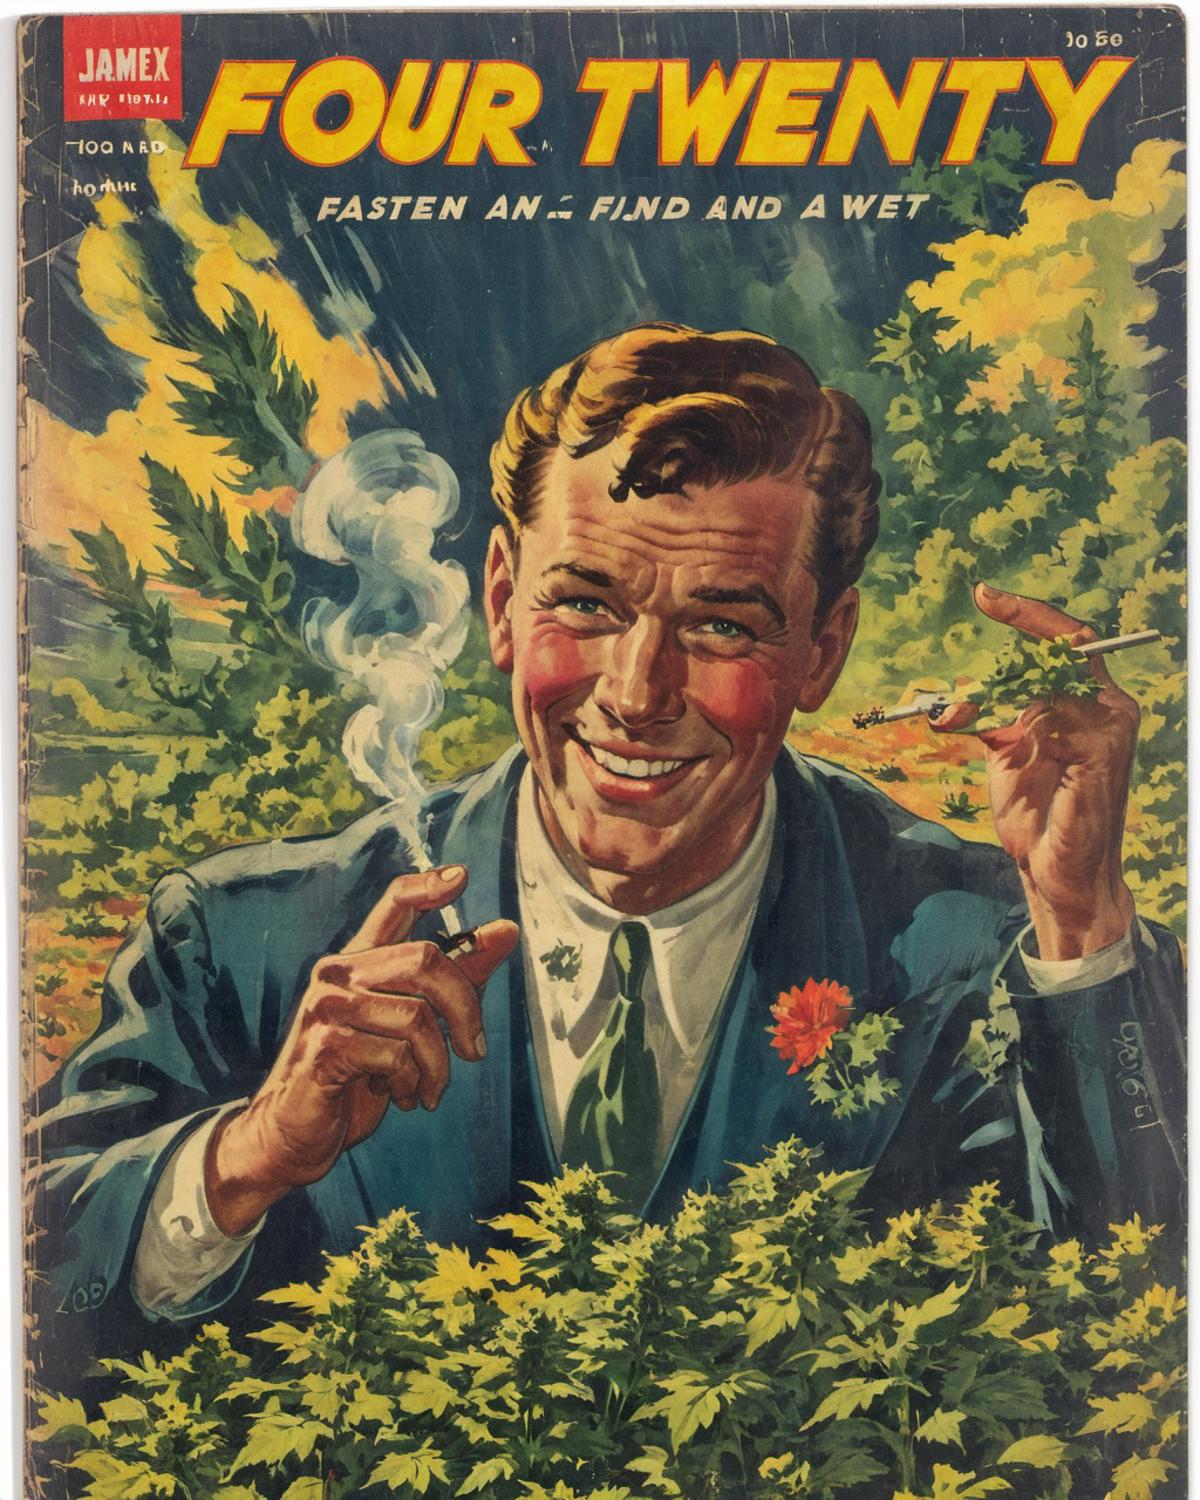 A vintage advertisement featuring a man smiling while holding a cigar.